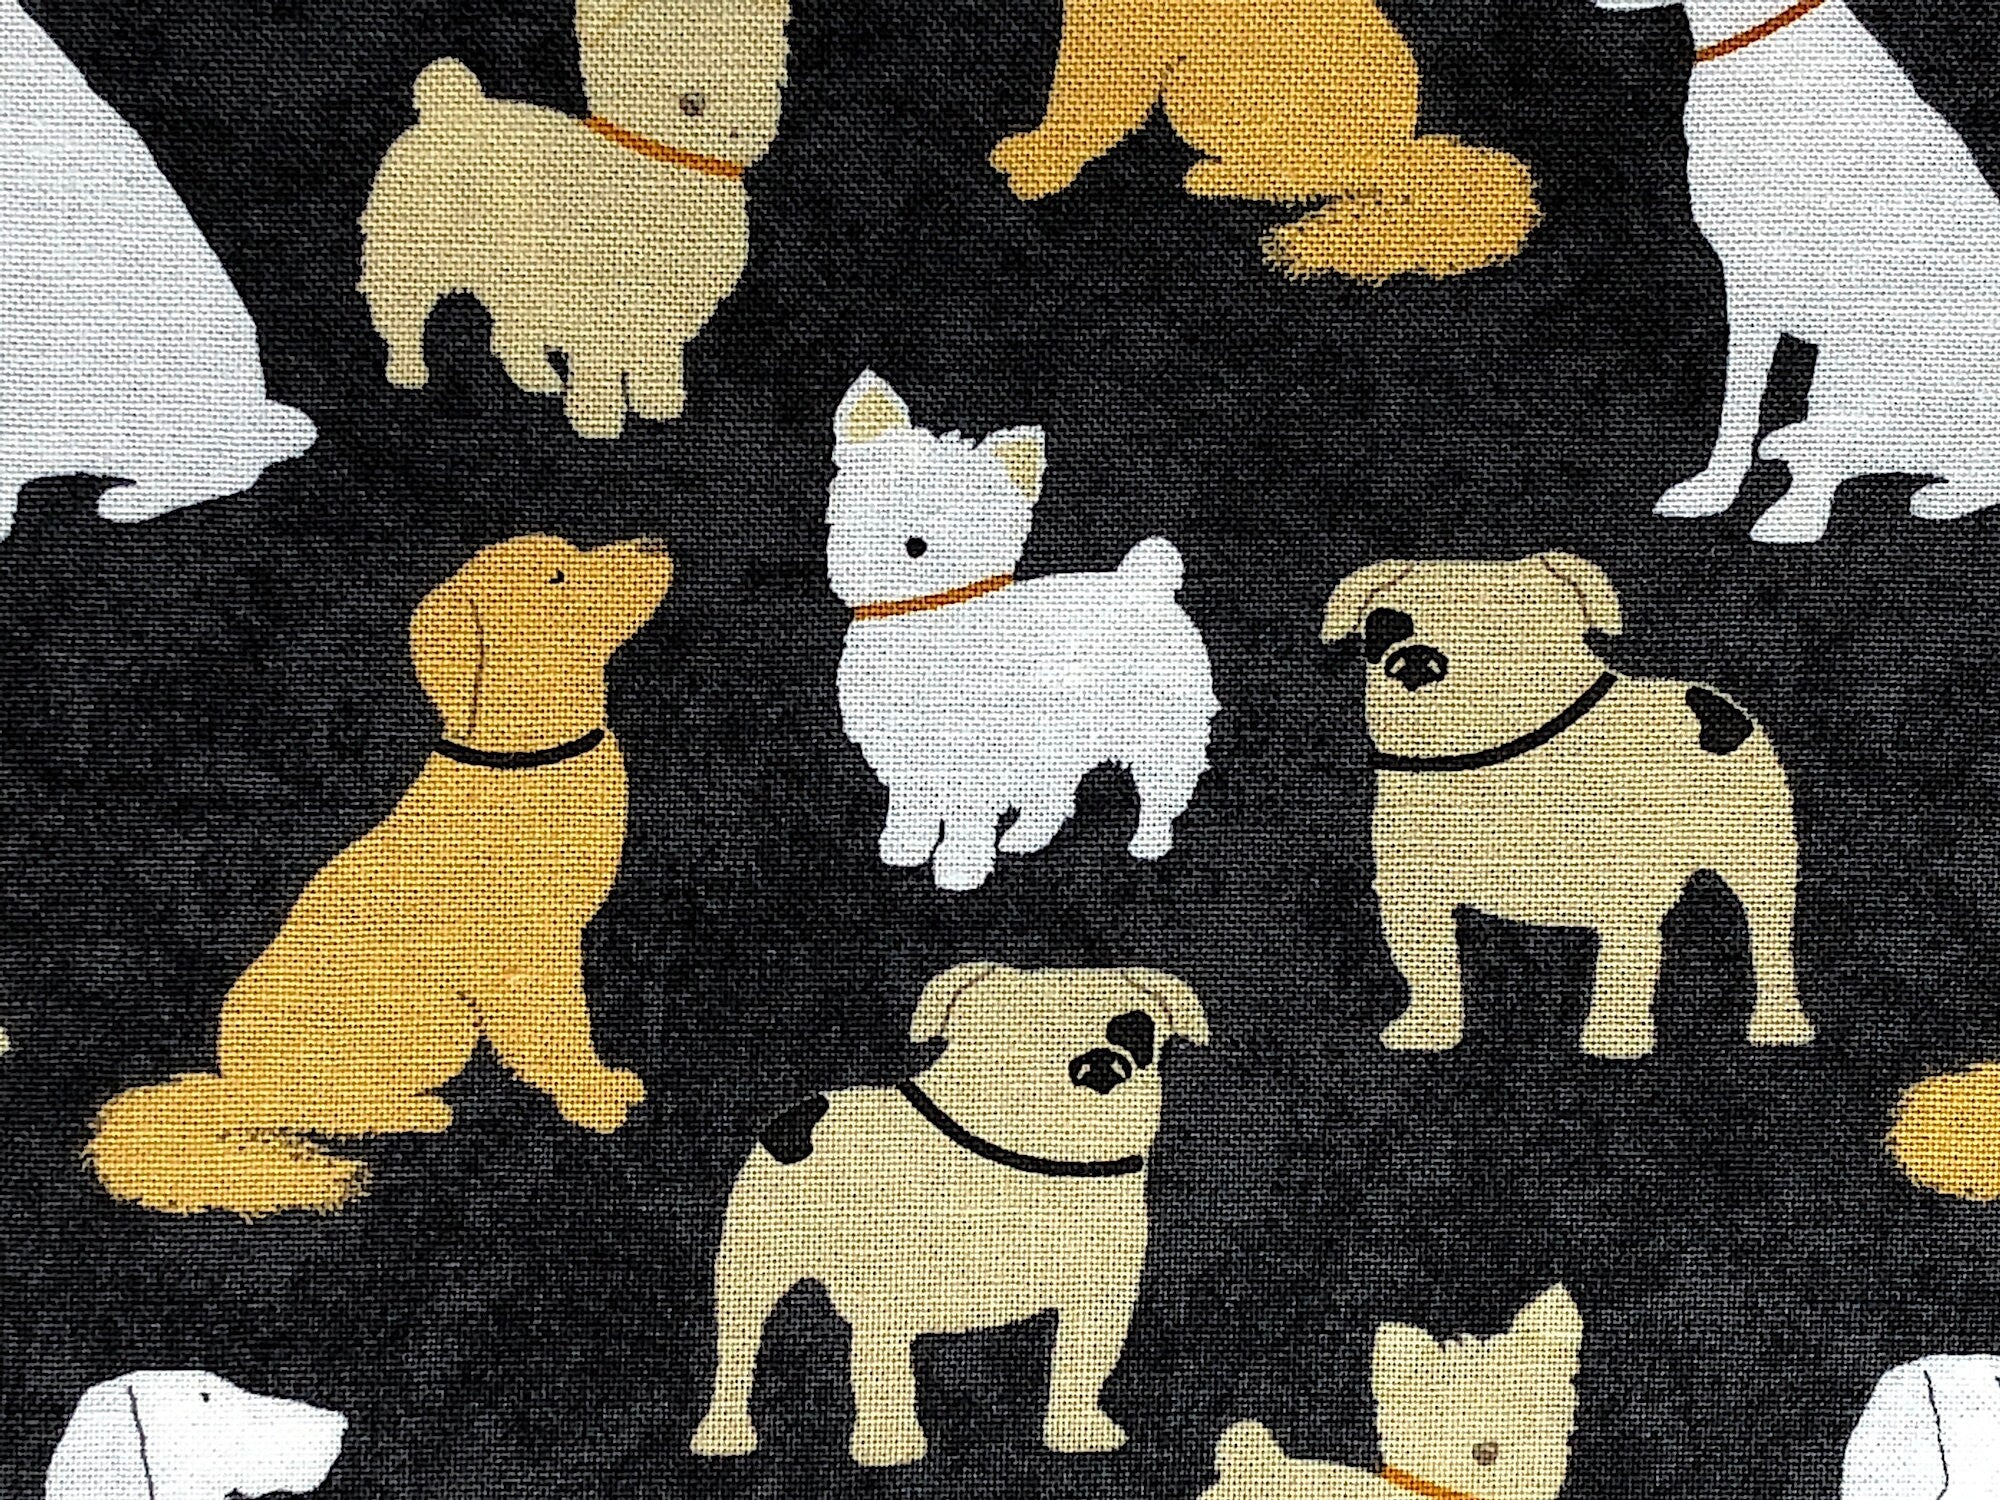 This black fabric by Wilmington Prints is covered with dogs of all breeds